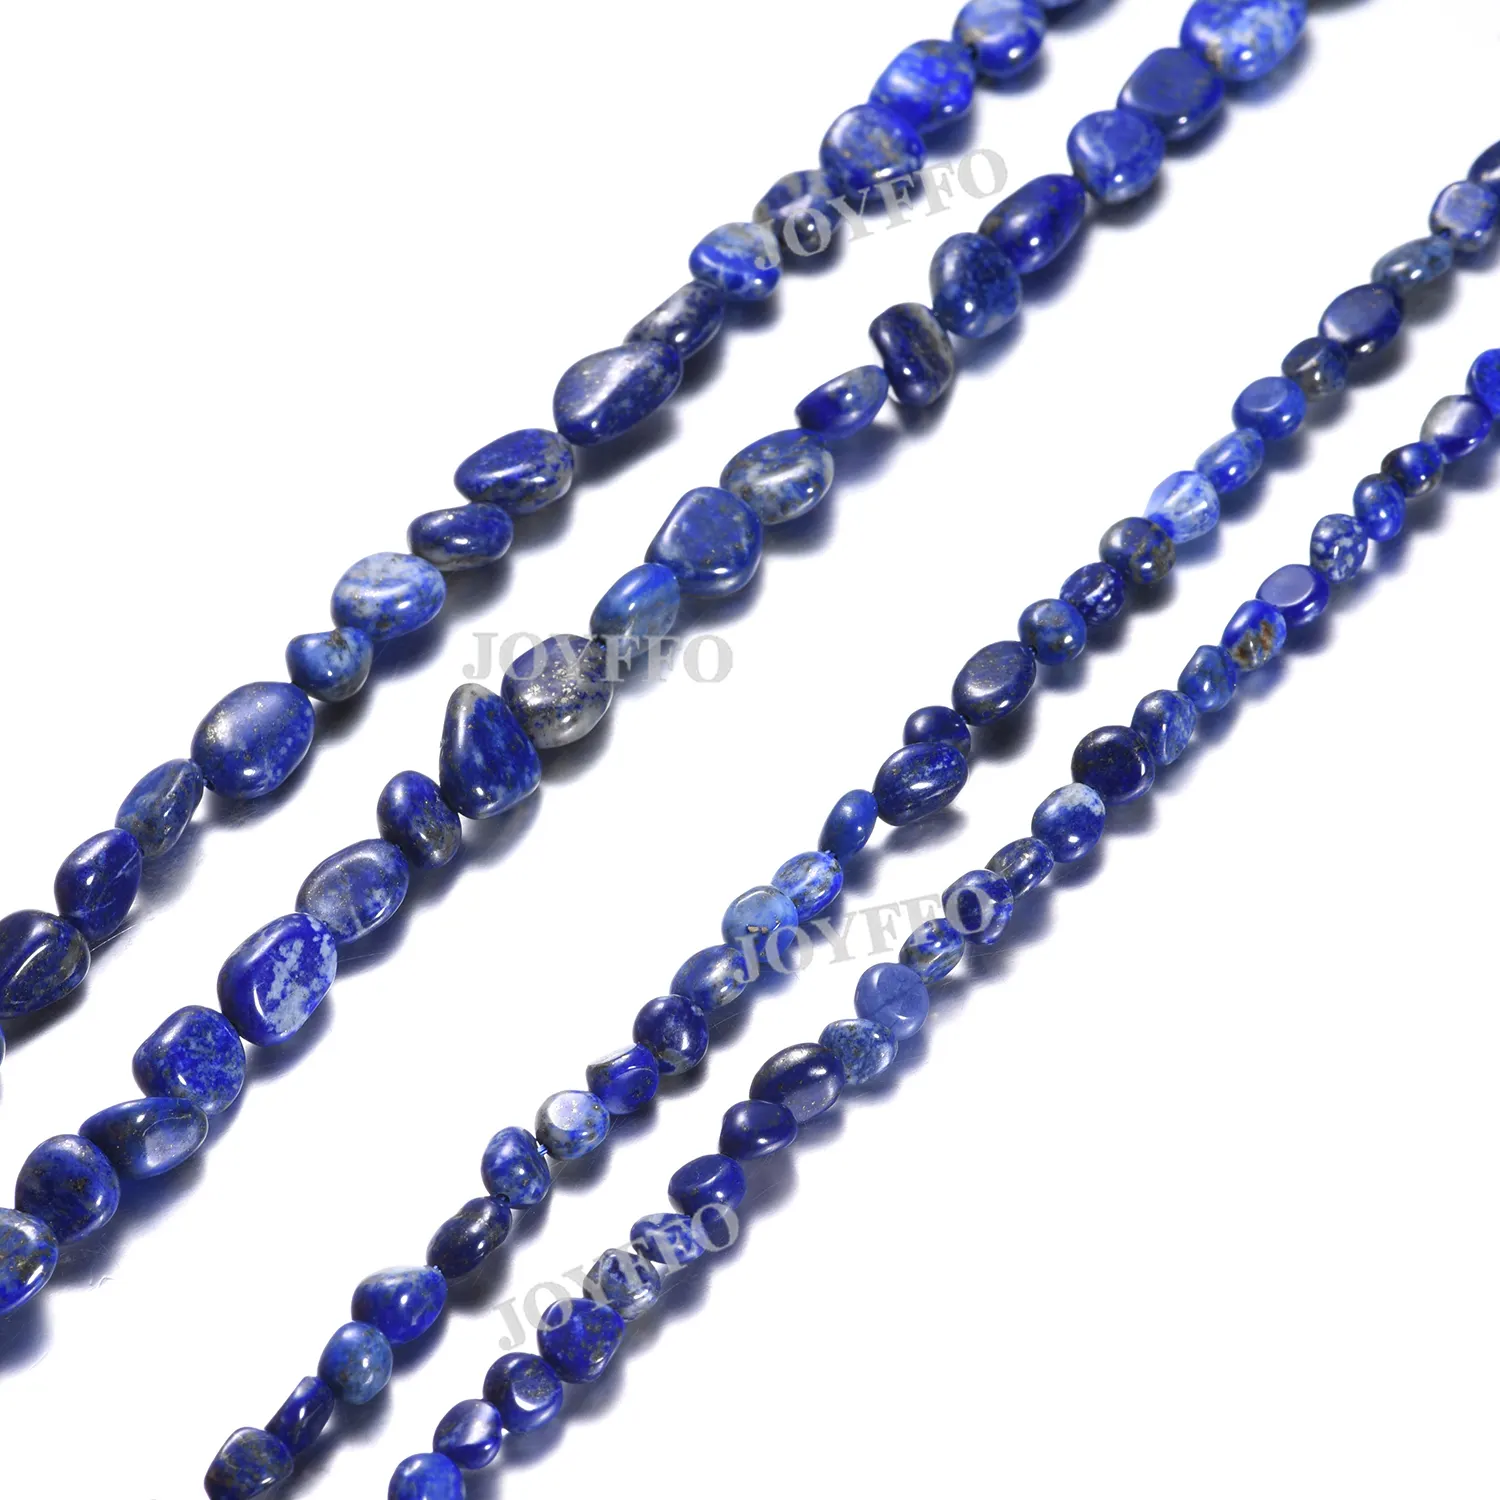 Wholesale Smooth Semi-precious Natural Stone Lapis Round Sodalite Blue Lapis Loose Beads For DIY Personalised Jewelry Making